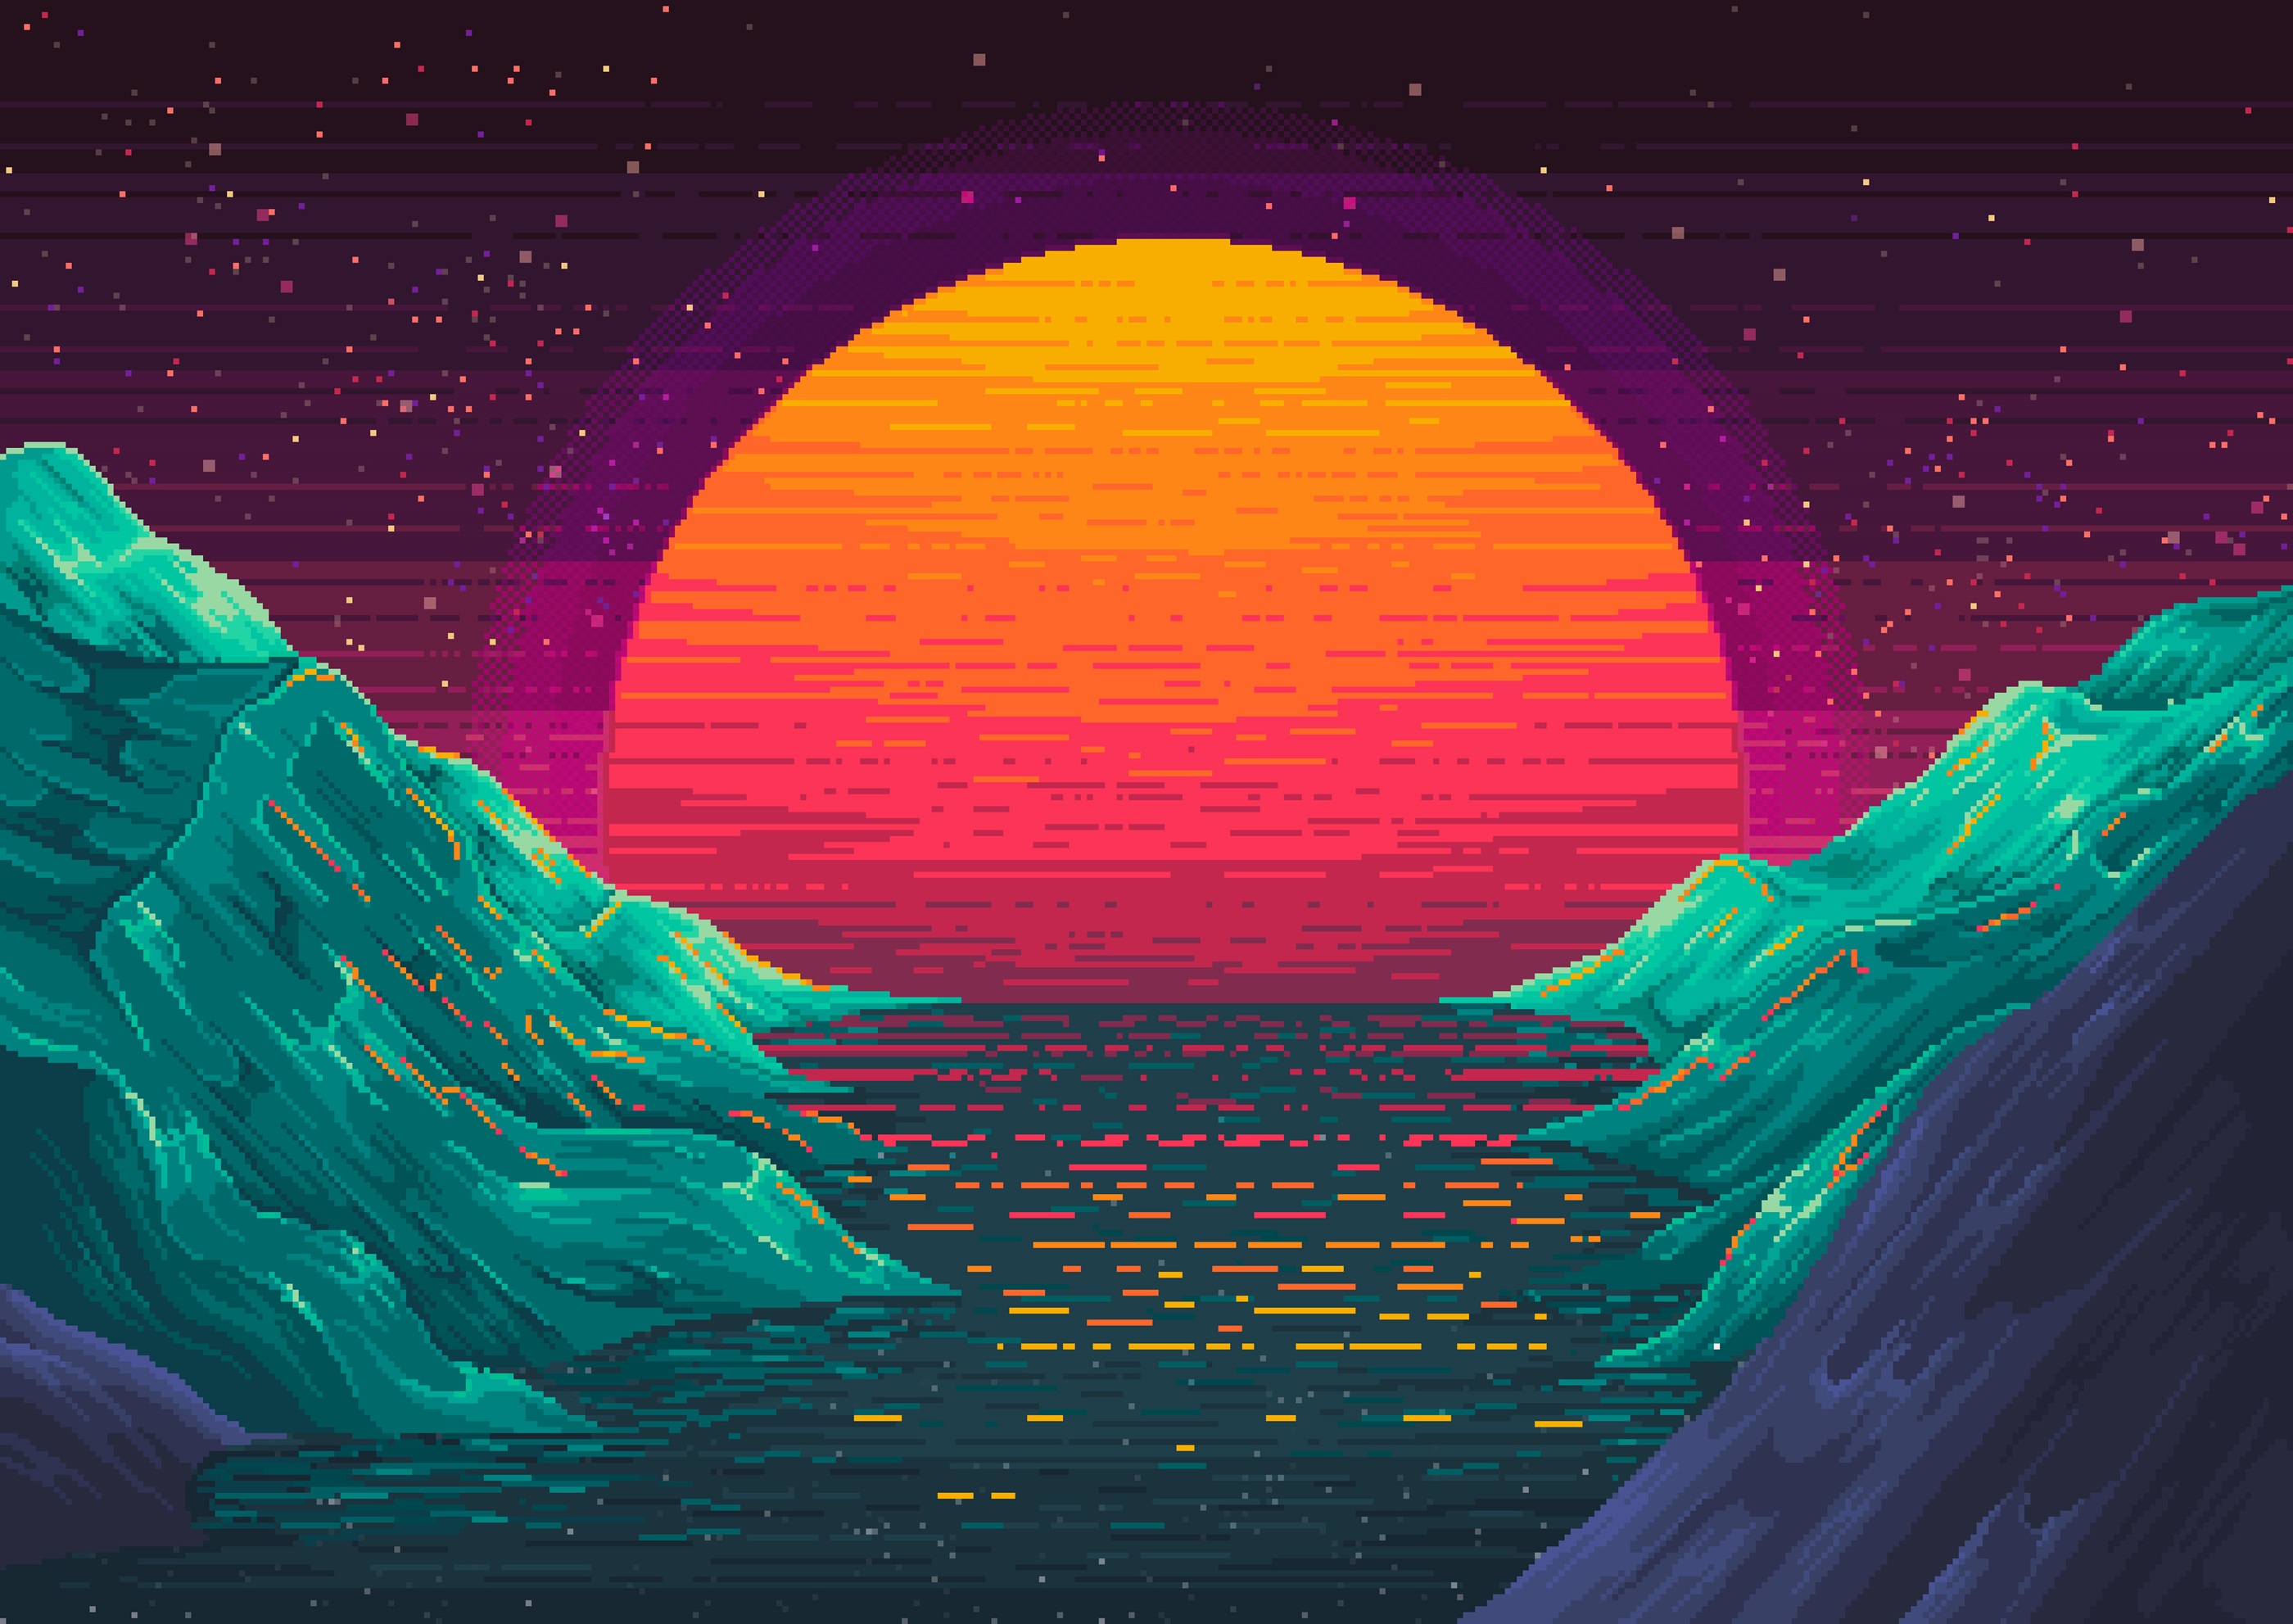 General 2800x1983 Sun water hills abstract stars mountains sun rays river pixel art pixelated